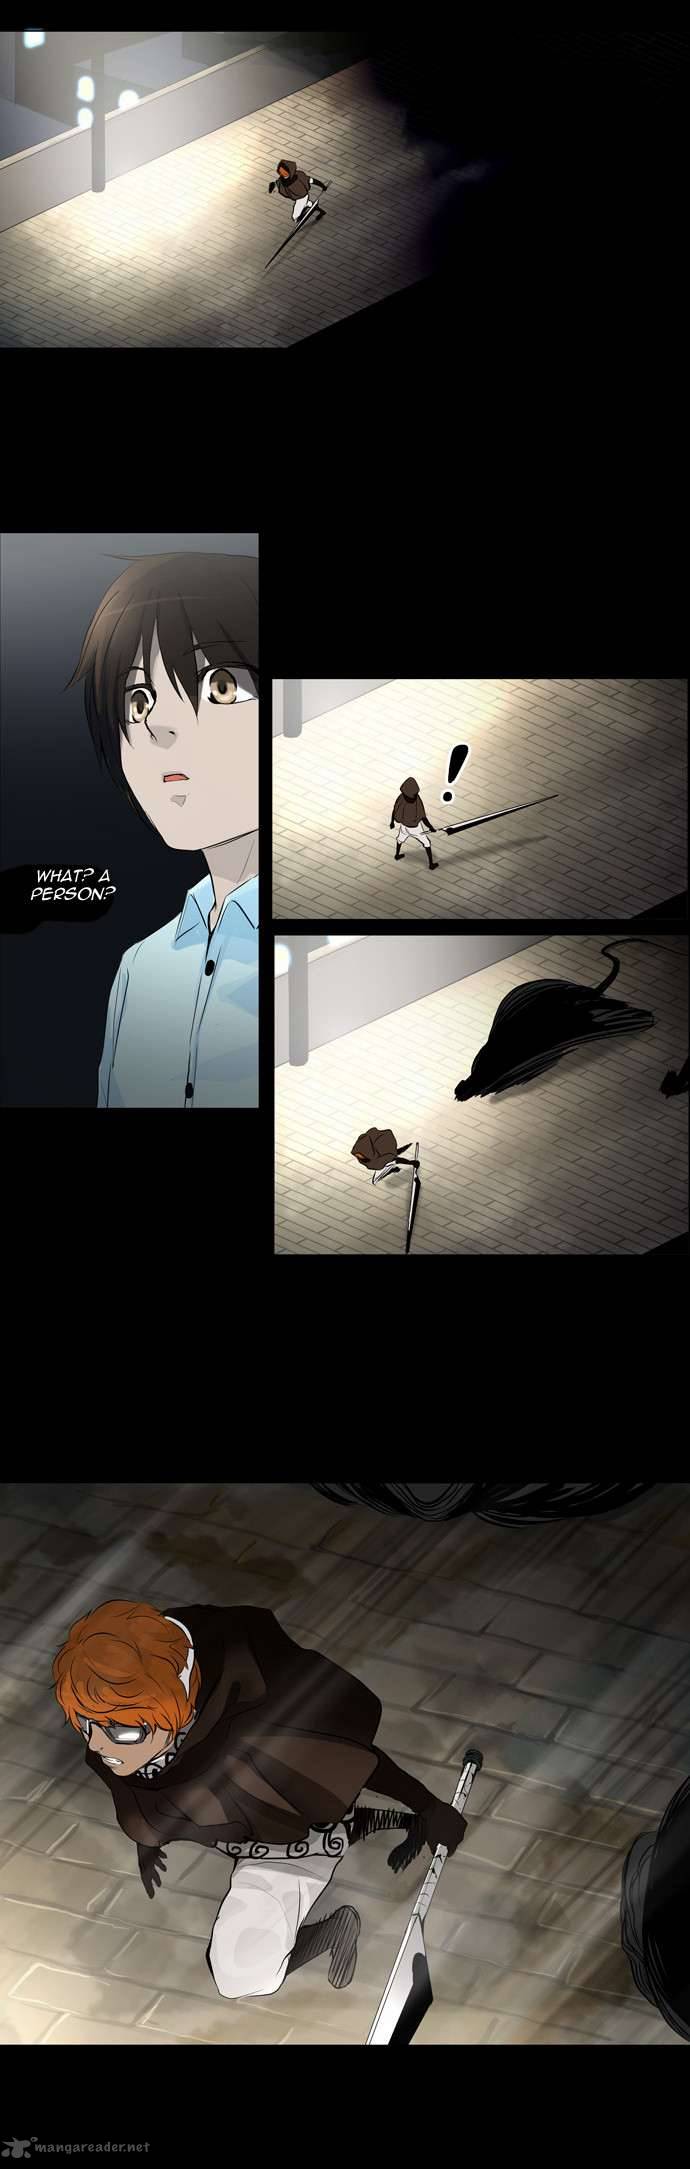 Tower Of God 136 27